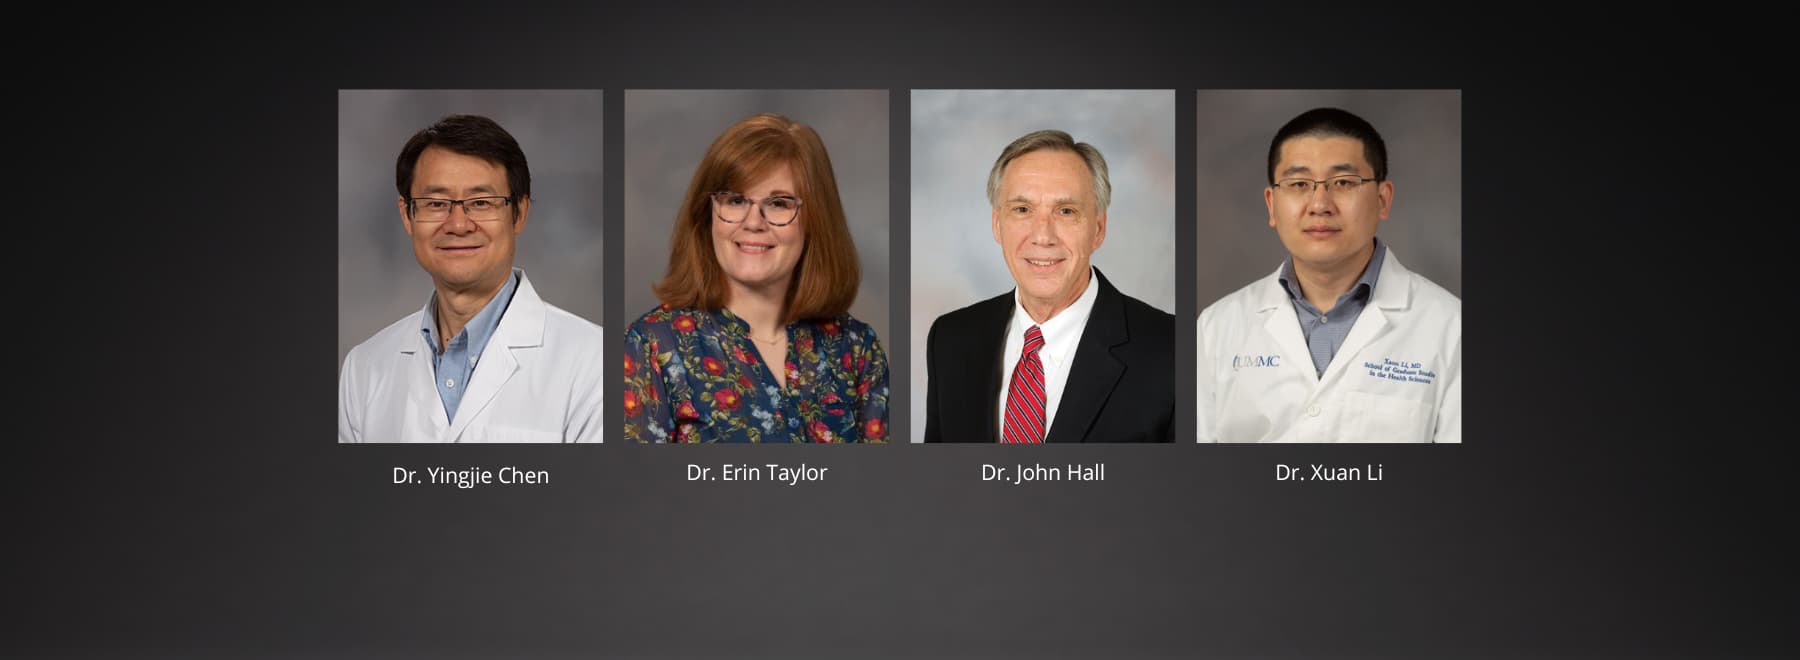 Grants and Awards, with images of Dr. Yingjie Chen, Dr. Erin Taylor, Dr. John Hall, and Dr. Xuan Li.